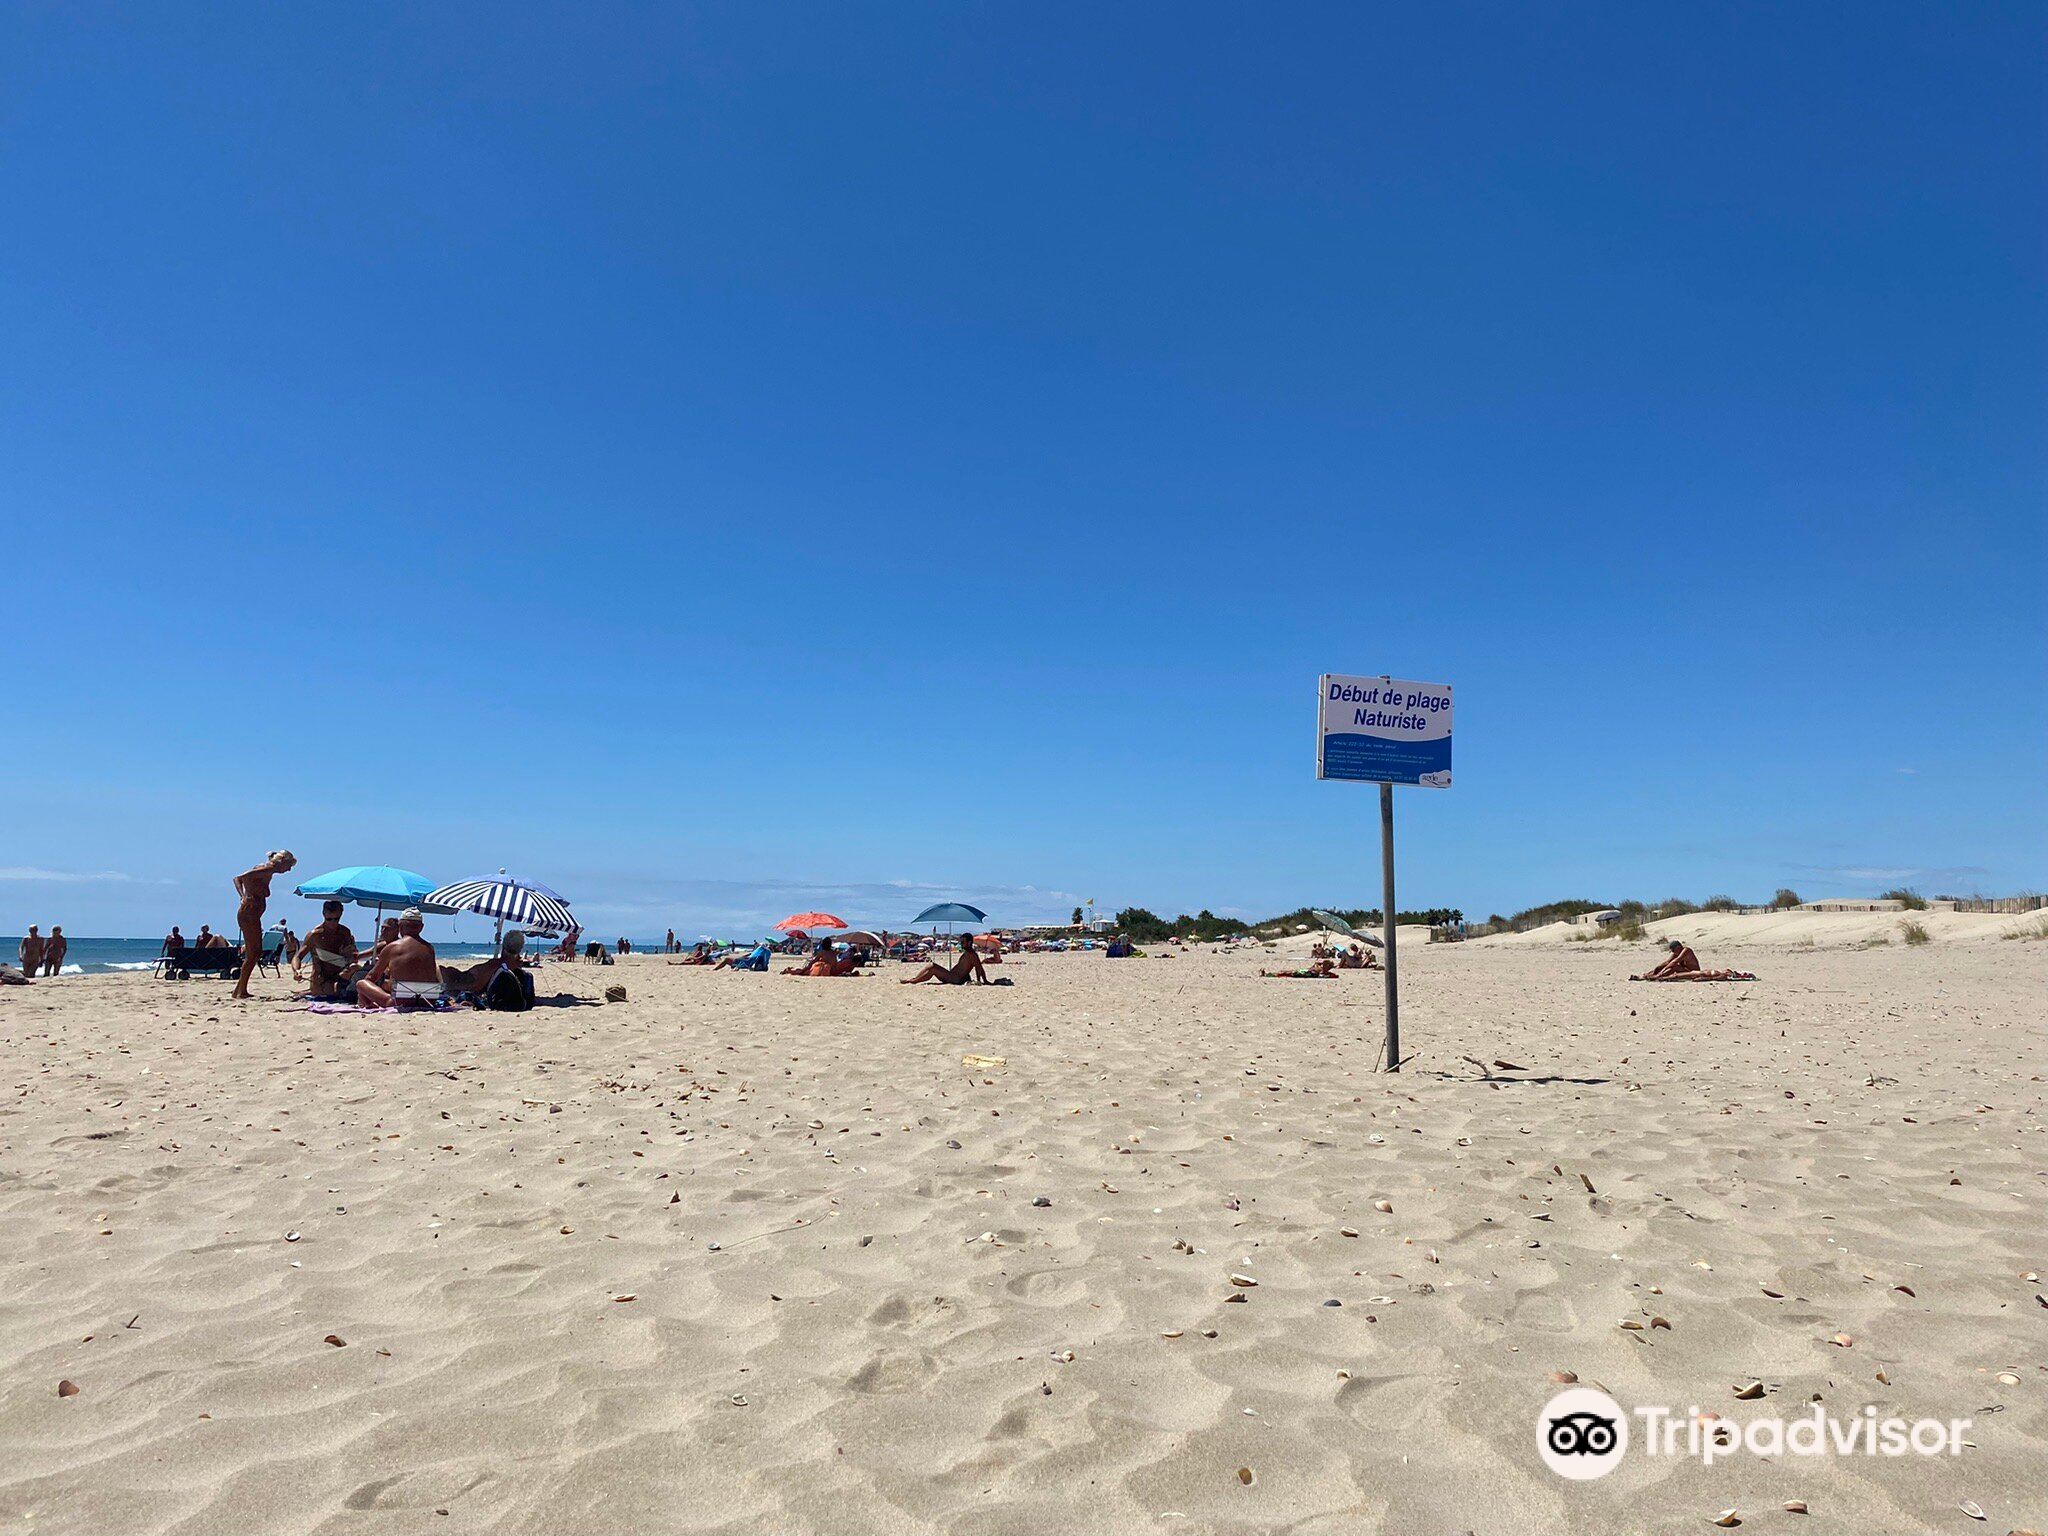 Latest travel itineraries for Plage Naturiste in September (updated in 2023), Plage Naturiste reviews, Plage Naturiste address and opening hours, popular attractions, hotels, and restaurants near Plage Naturiste picture